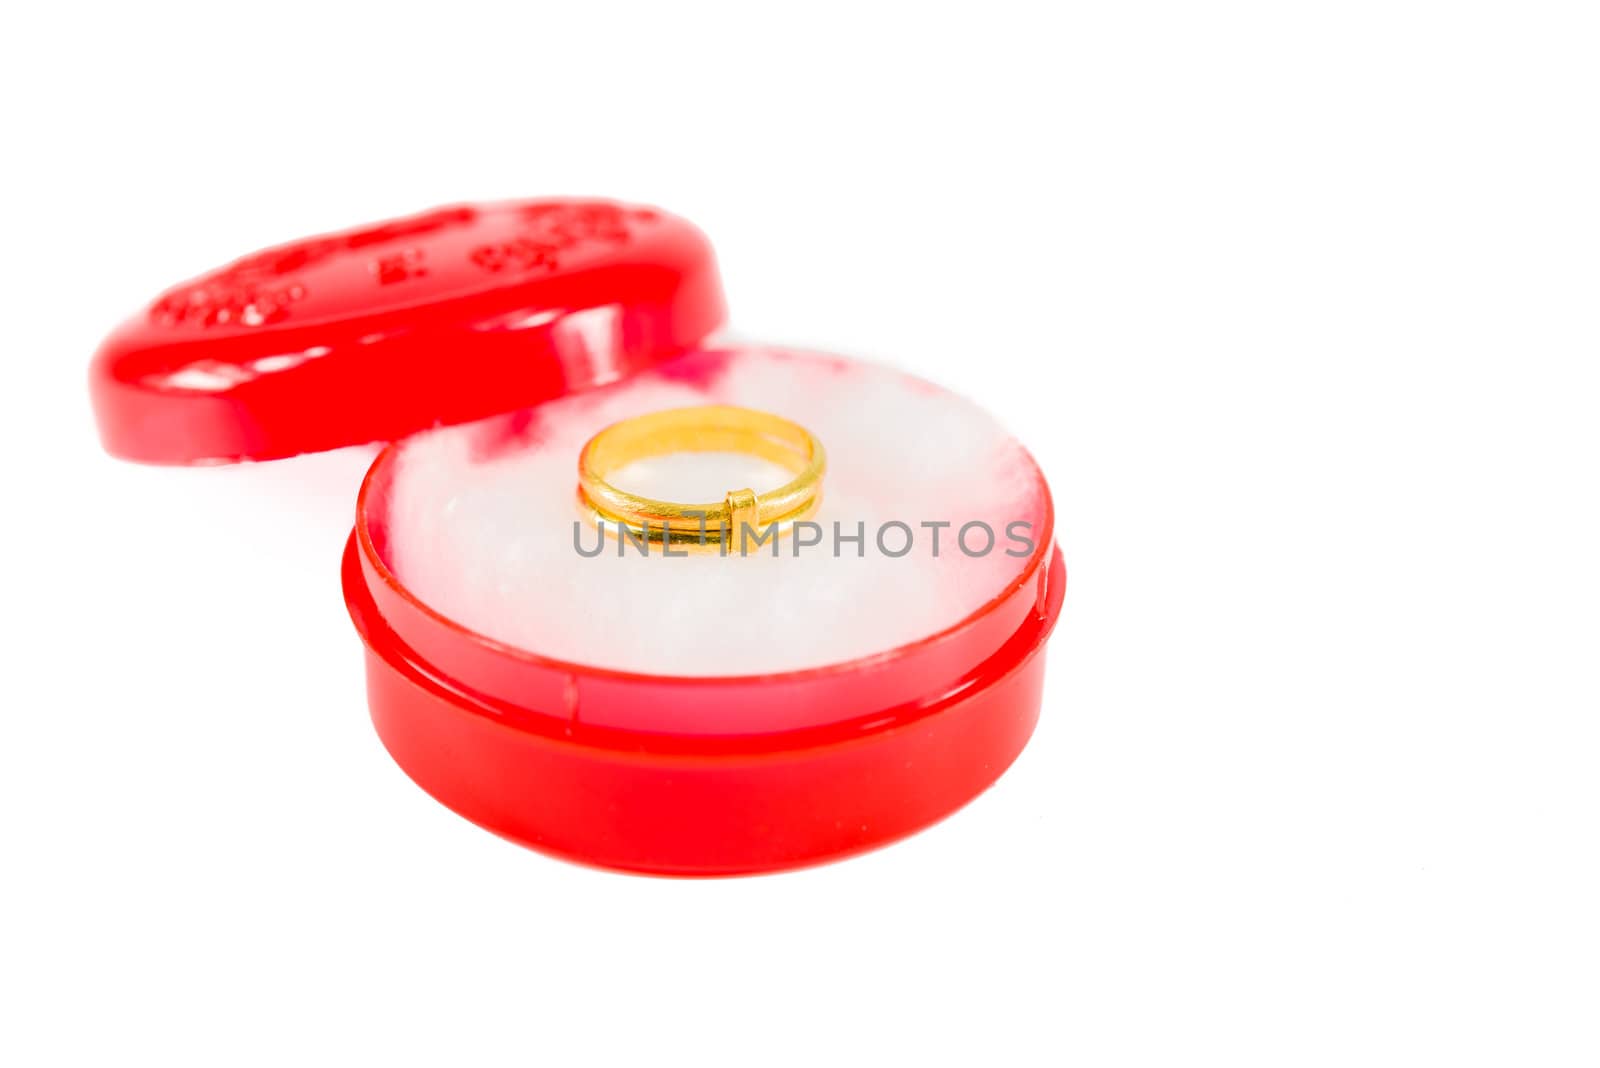 Gold ring on red box on white background isolated